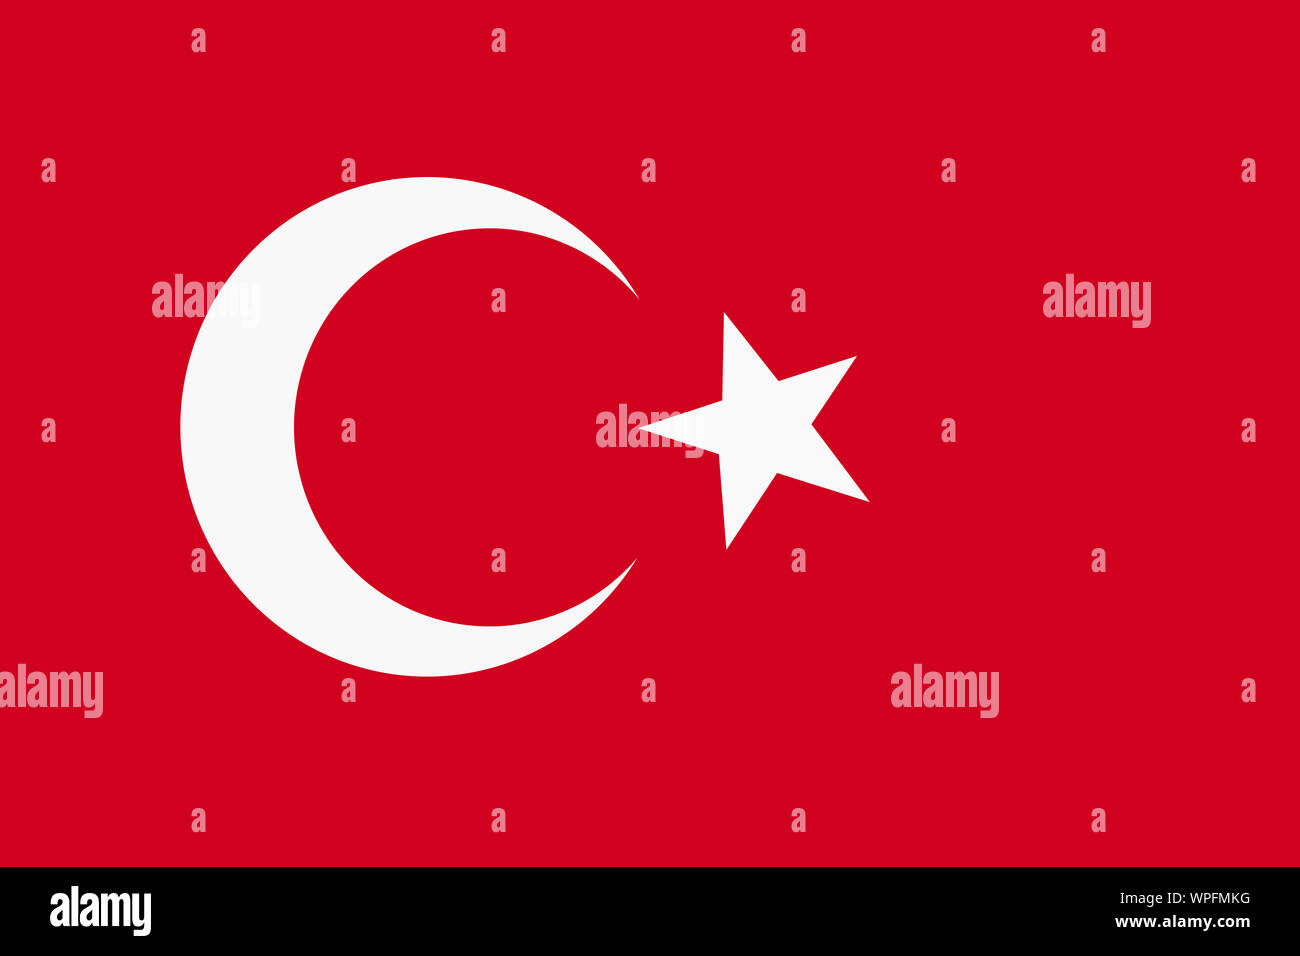 A Turkey flag background illustration red crescent moon star Stock Photo